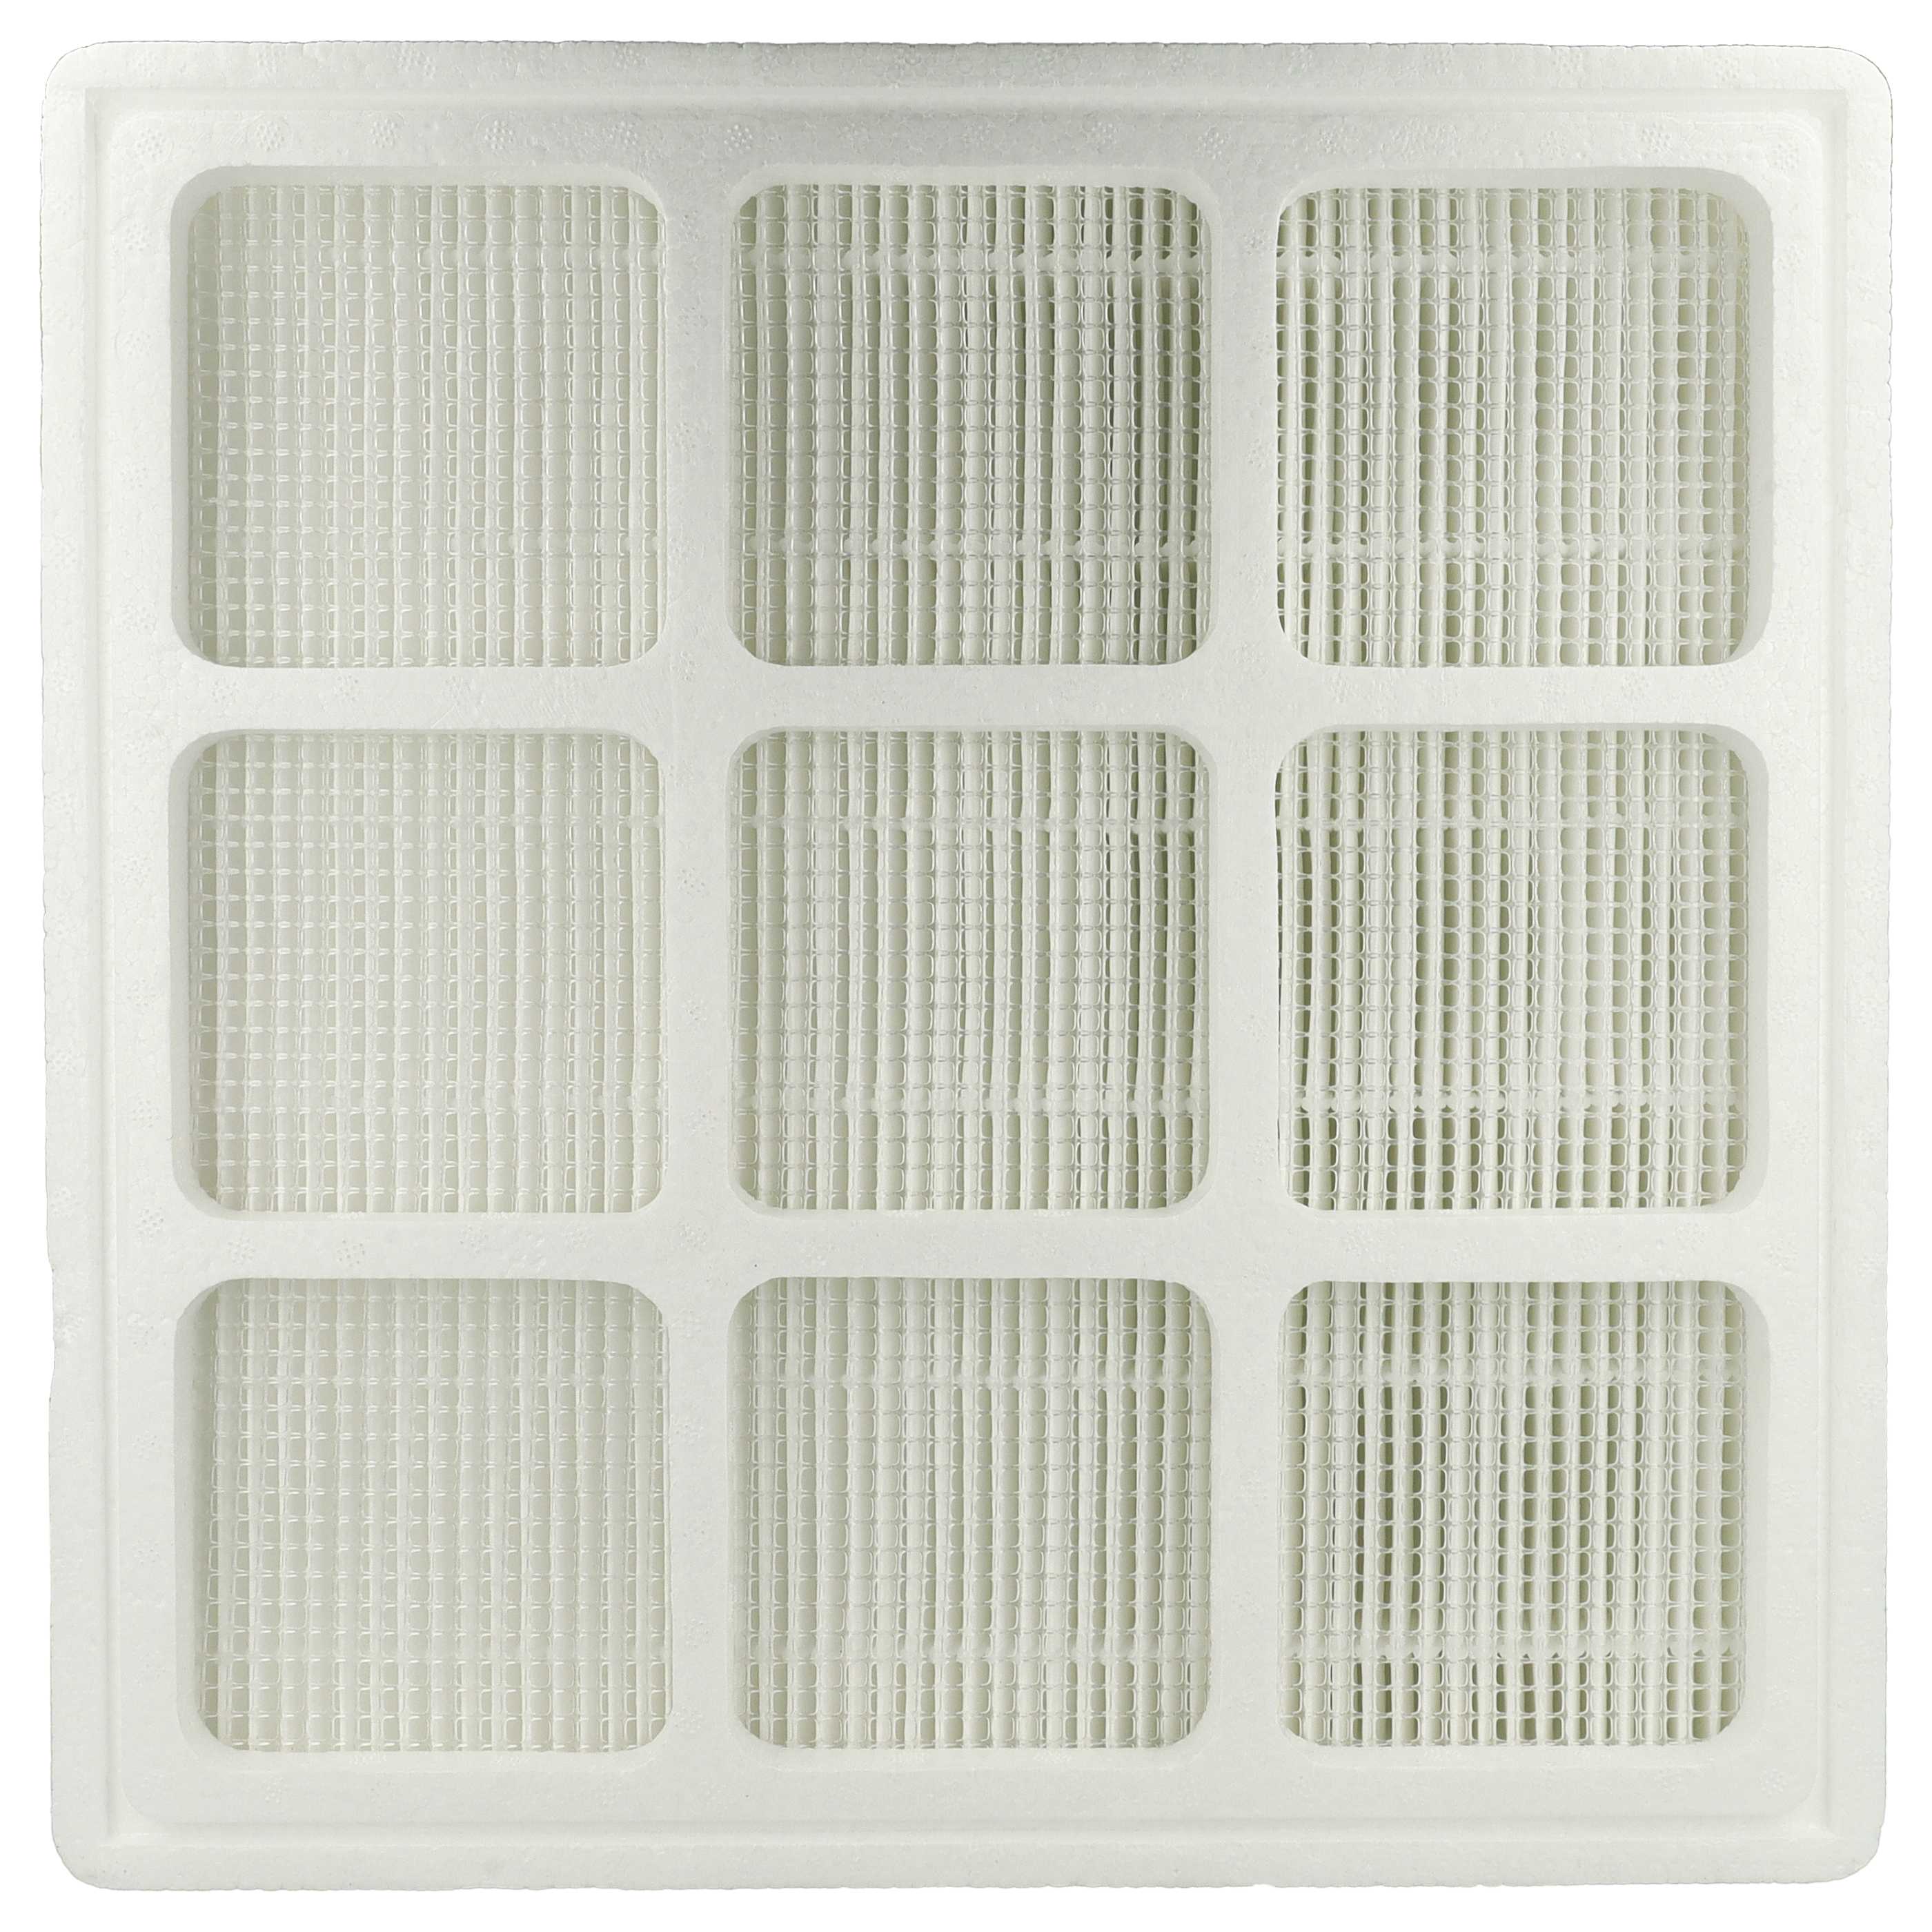 vhbw HEPA Filter Replacement for IQAir 102141400 for Air Cleaner - Spare Air Filter